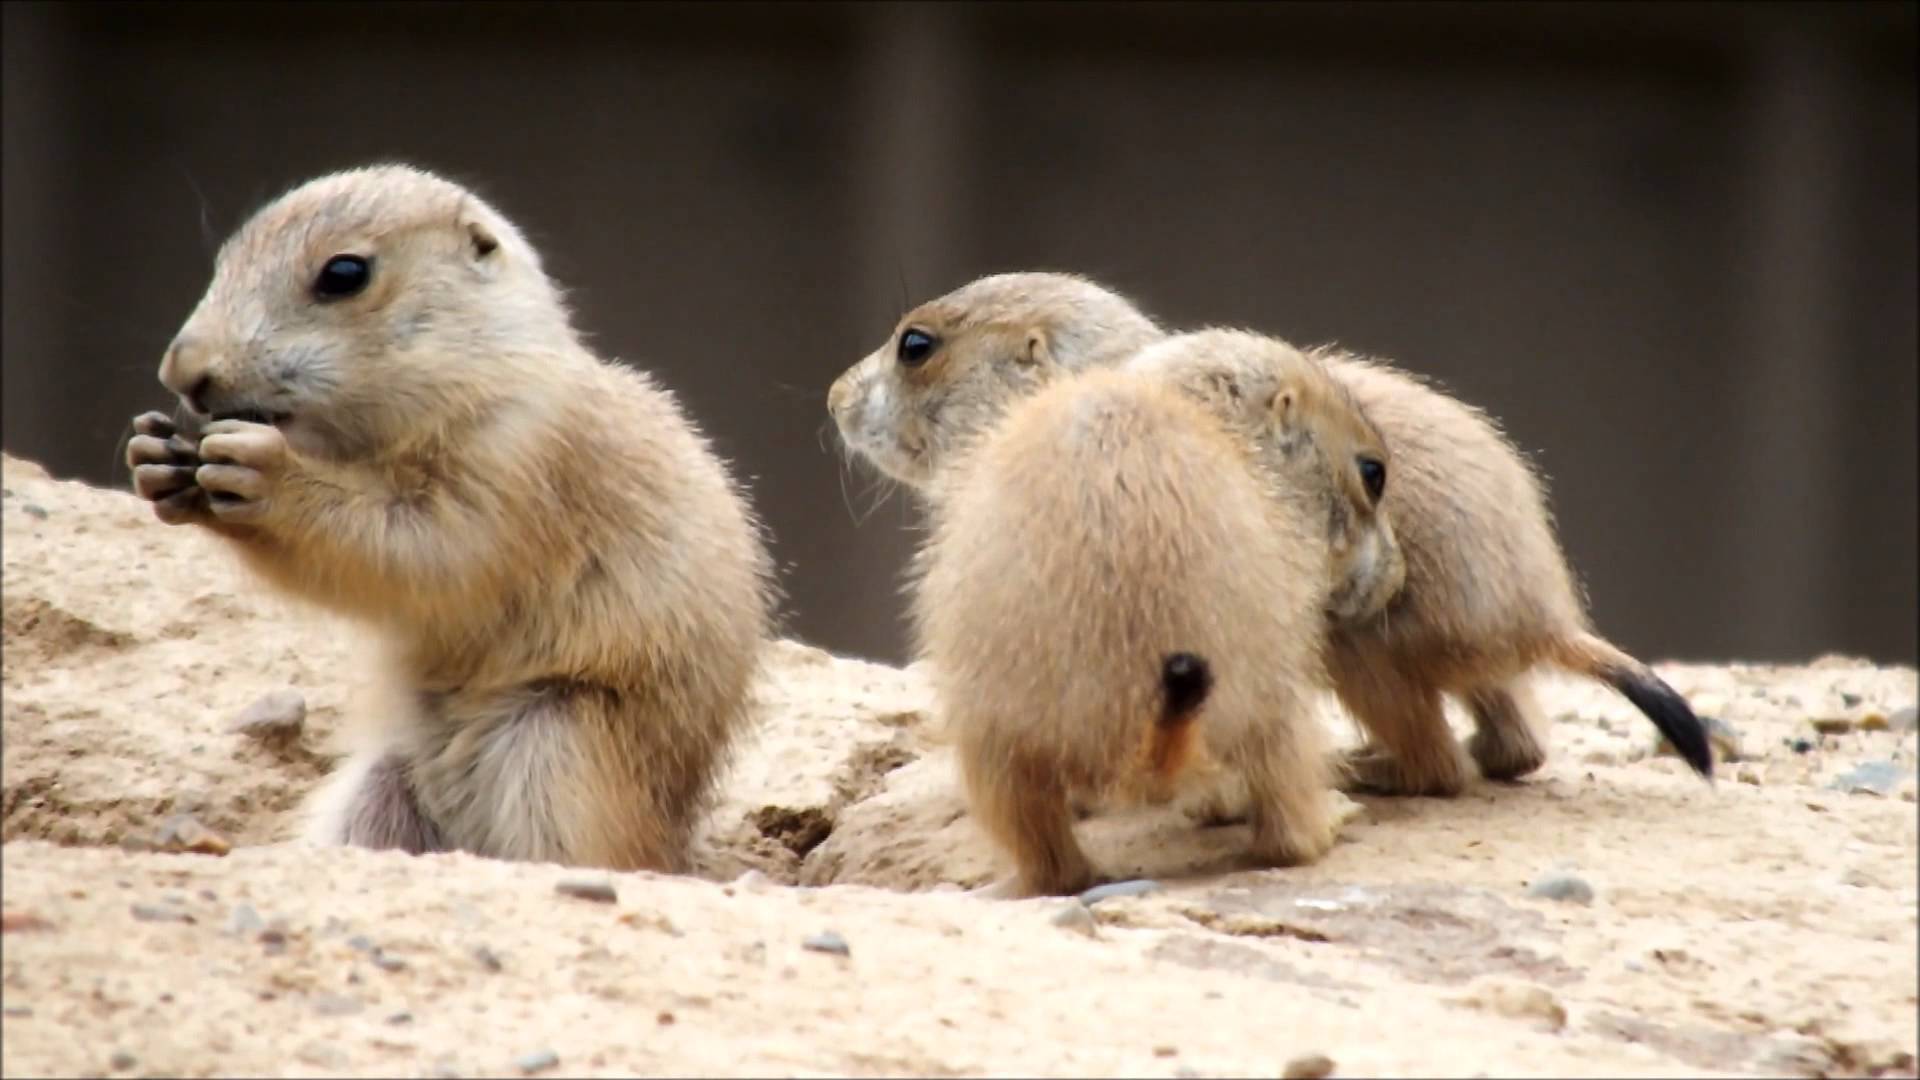 Baby Prairie Dogs at the Minnesota Zoo CUTE OVERLOAD! - YouTube